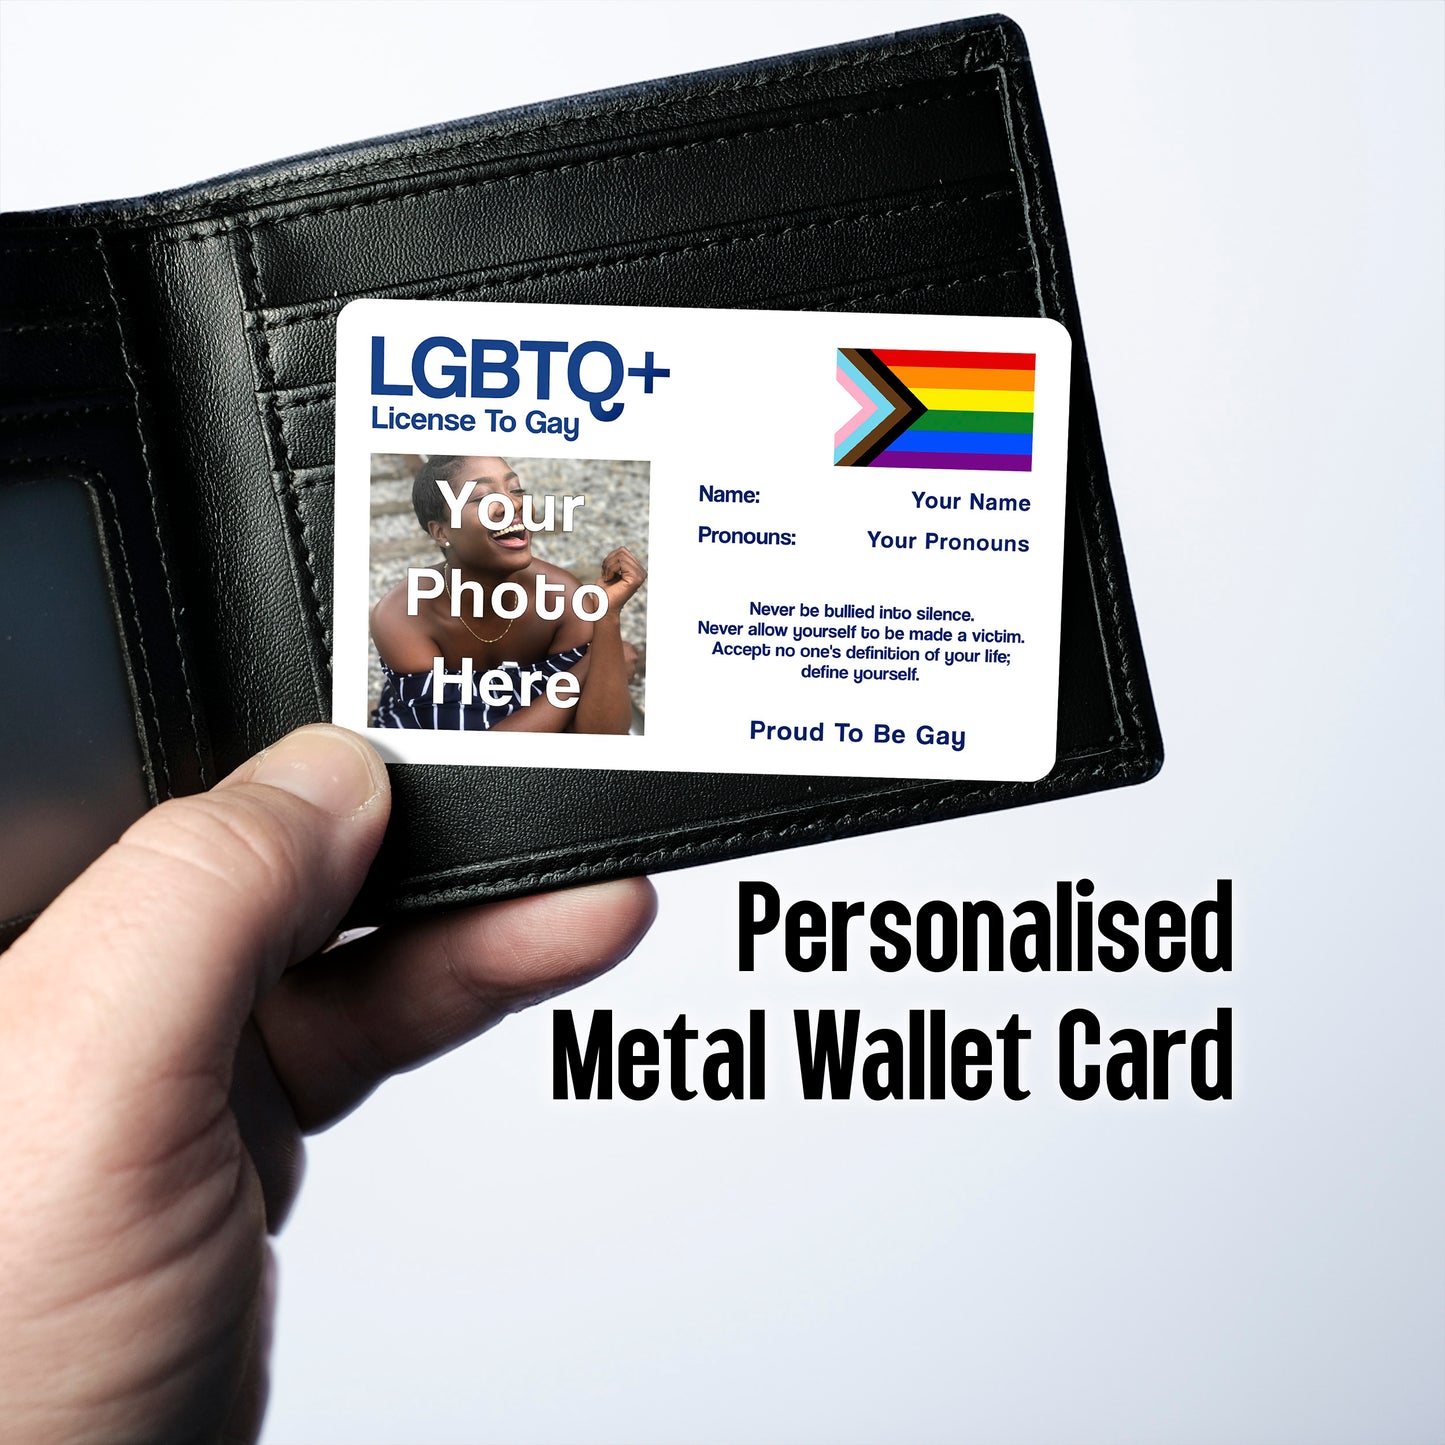 Progress pride license to gay aluminium card personalised with name pronouns and photo